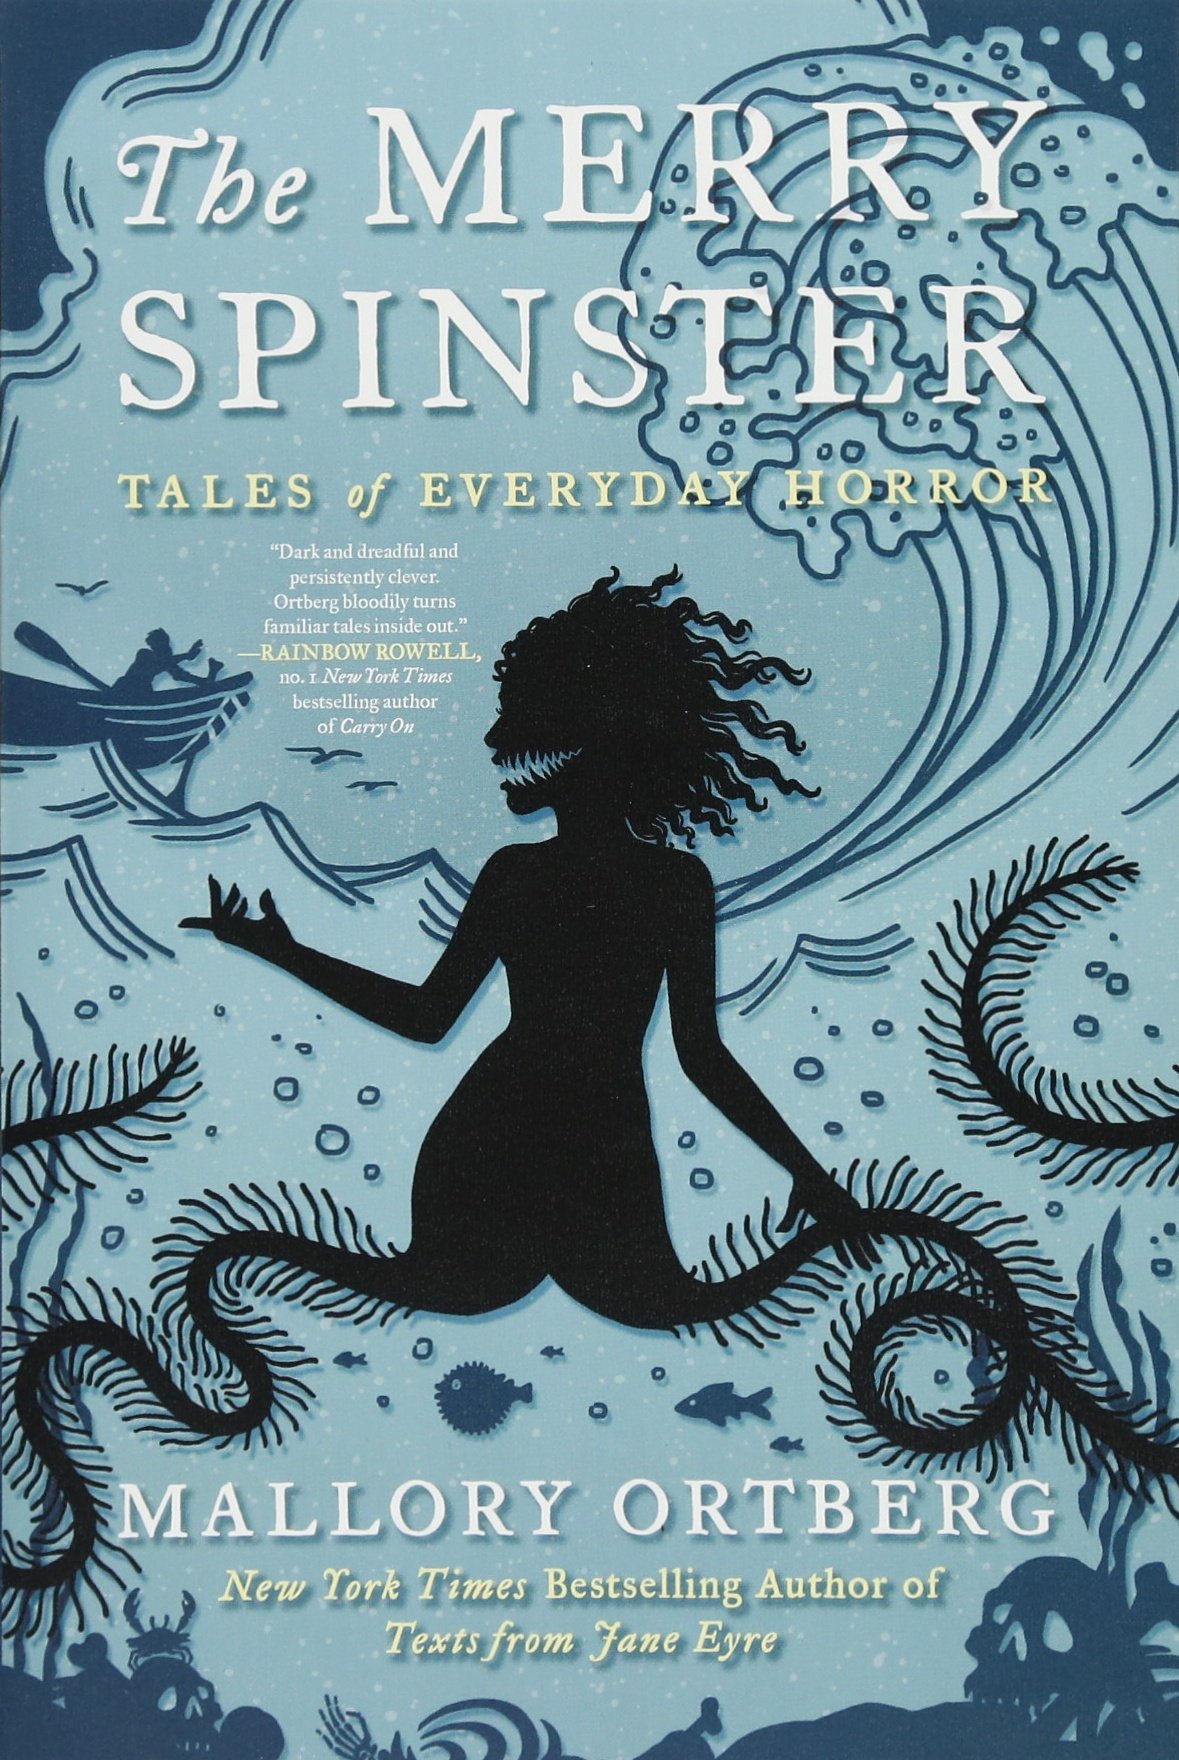 The Merry Spinster: Tales of Everyday Horror by Mallory Ortberg (now Daniel Lavery)